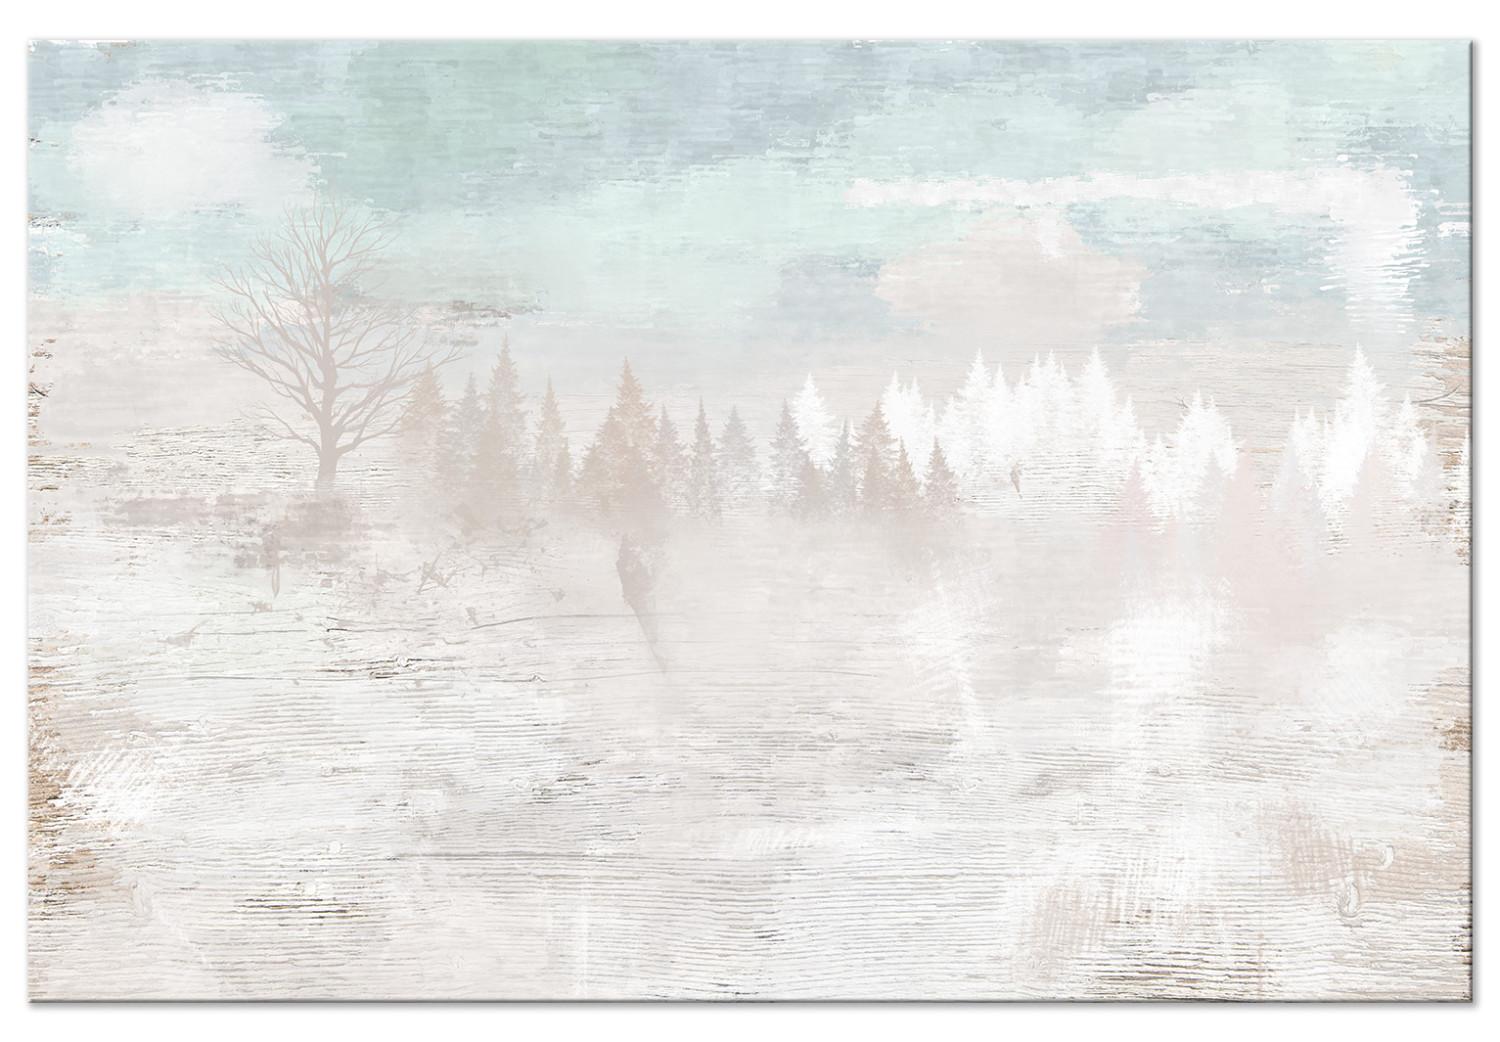 Canvas Calm Trees - Winter Landscape Painted in Soft Colors